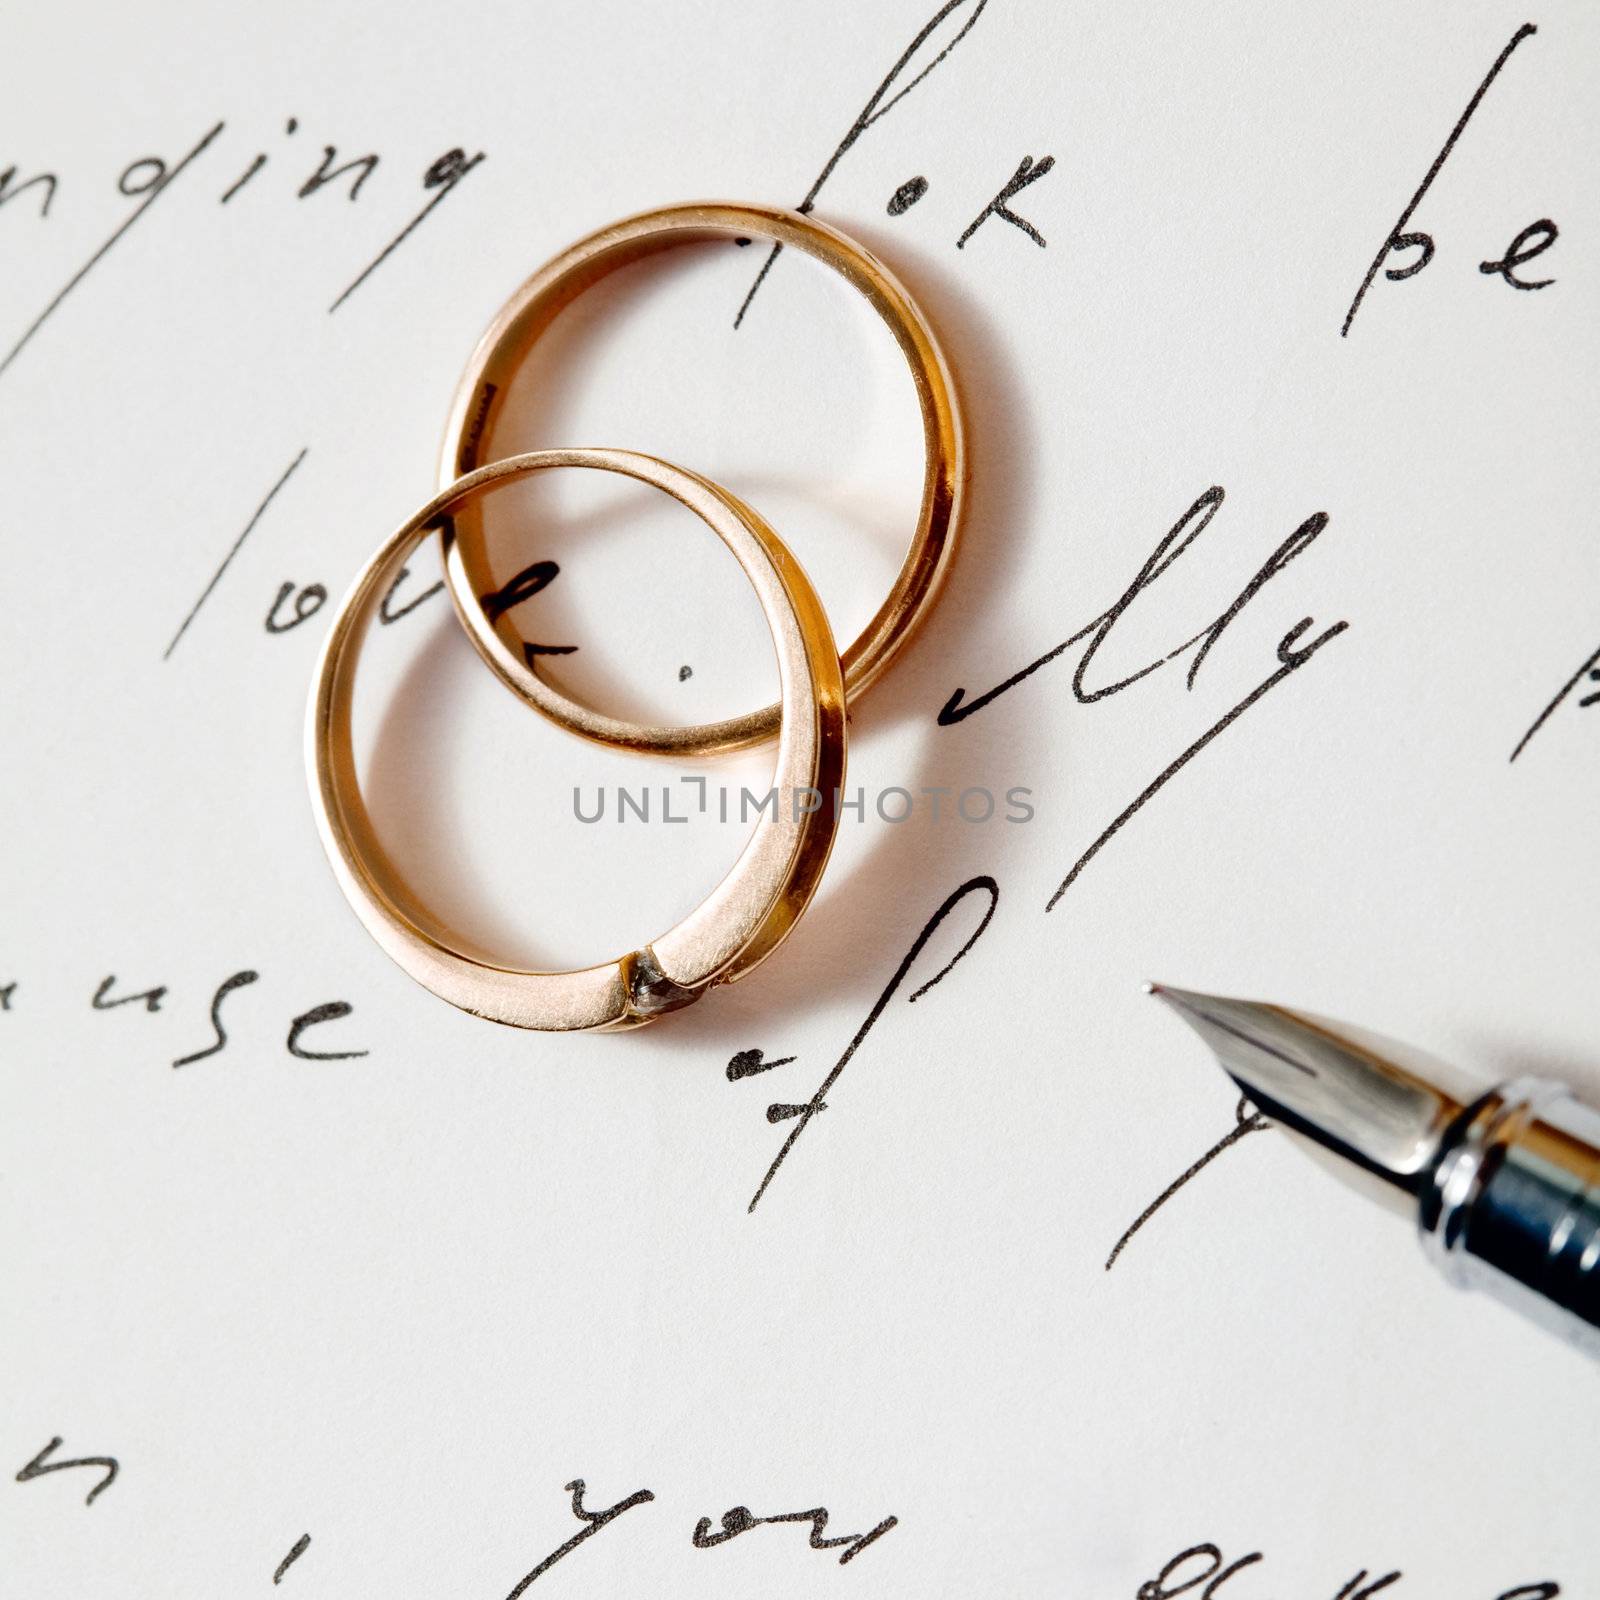 An image of two wedding rings on a letter and a pen